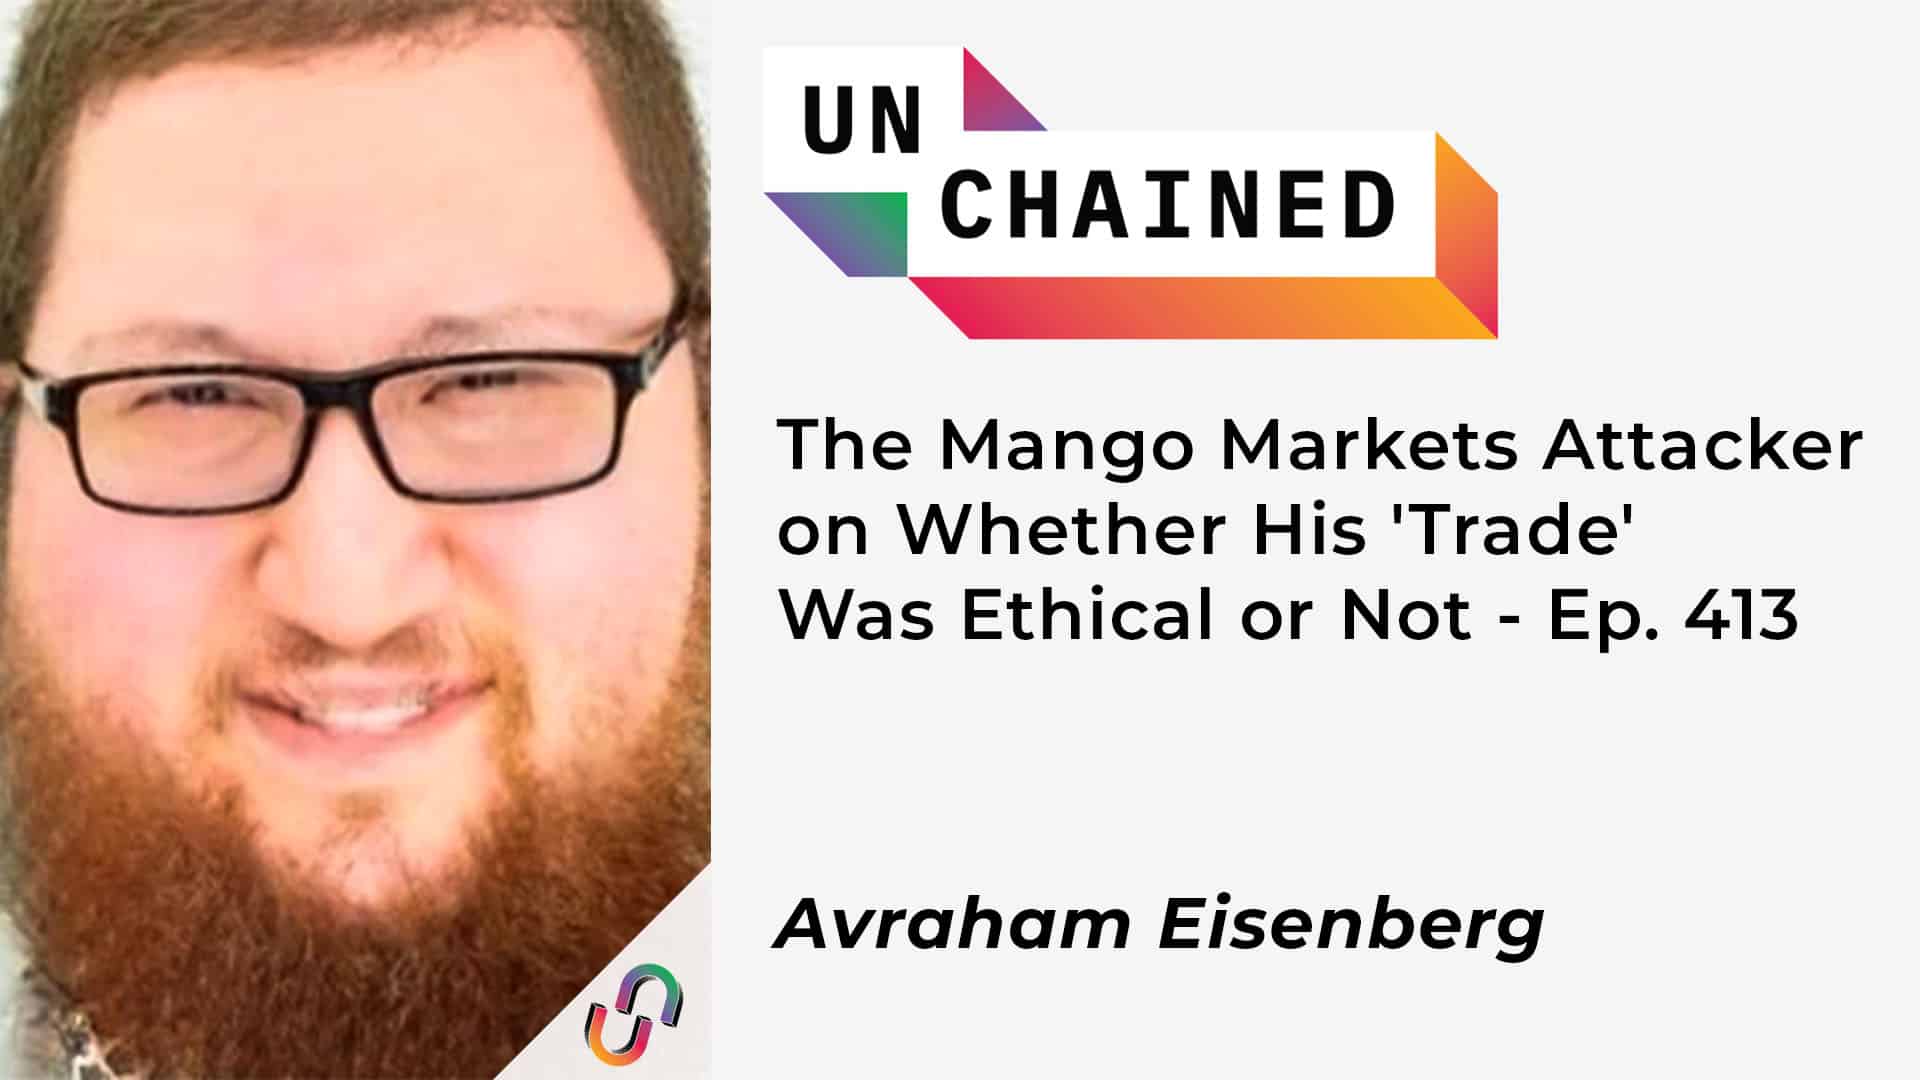 The Mango Markets Attacker on Whether His 'Trade' Was Ethical or Not - Ep. 413